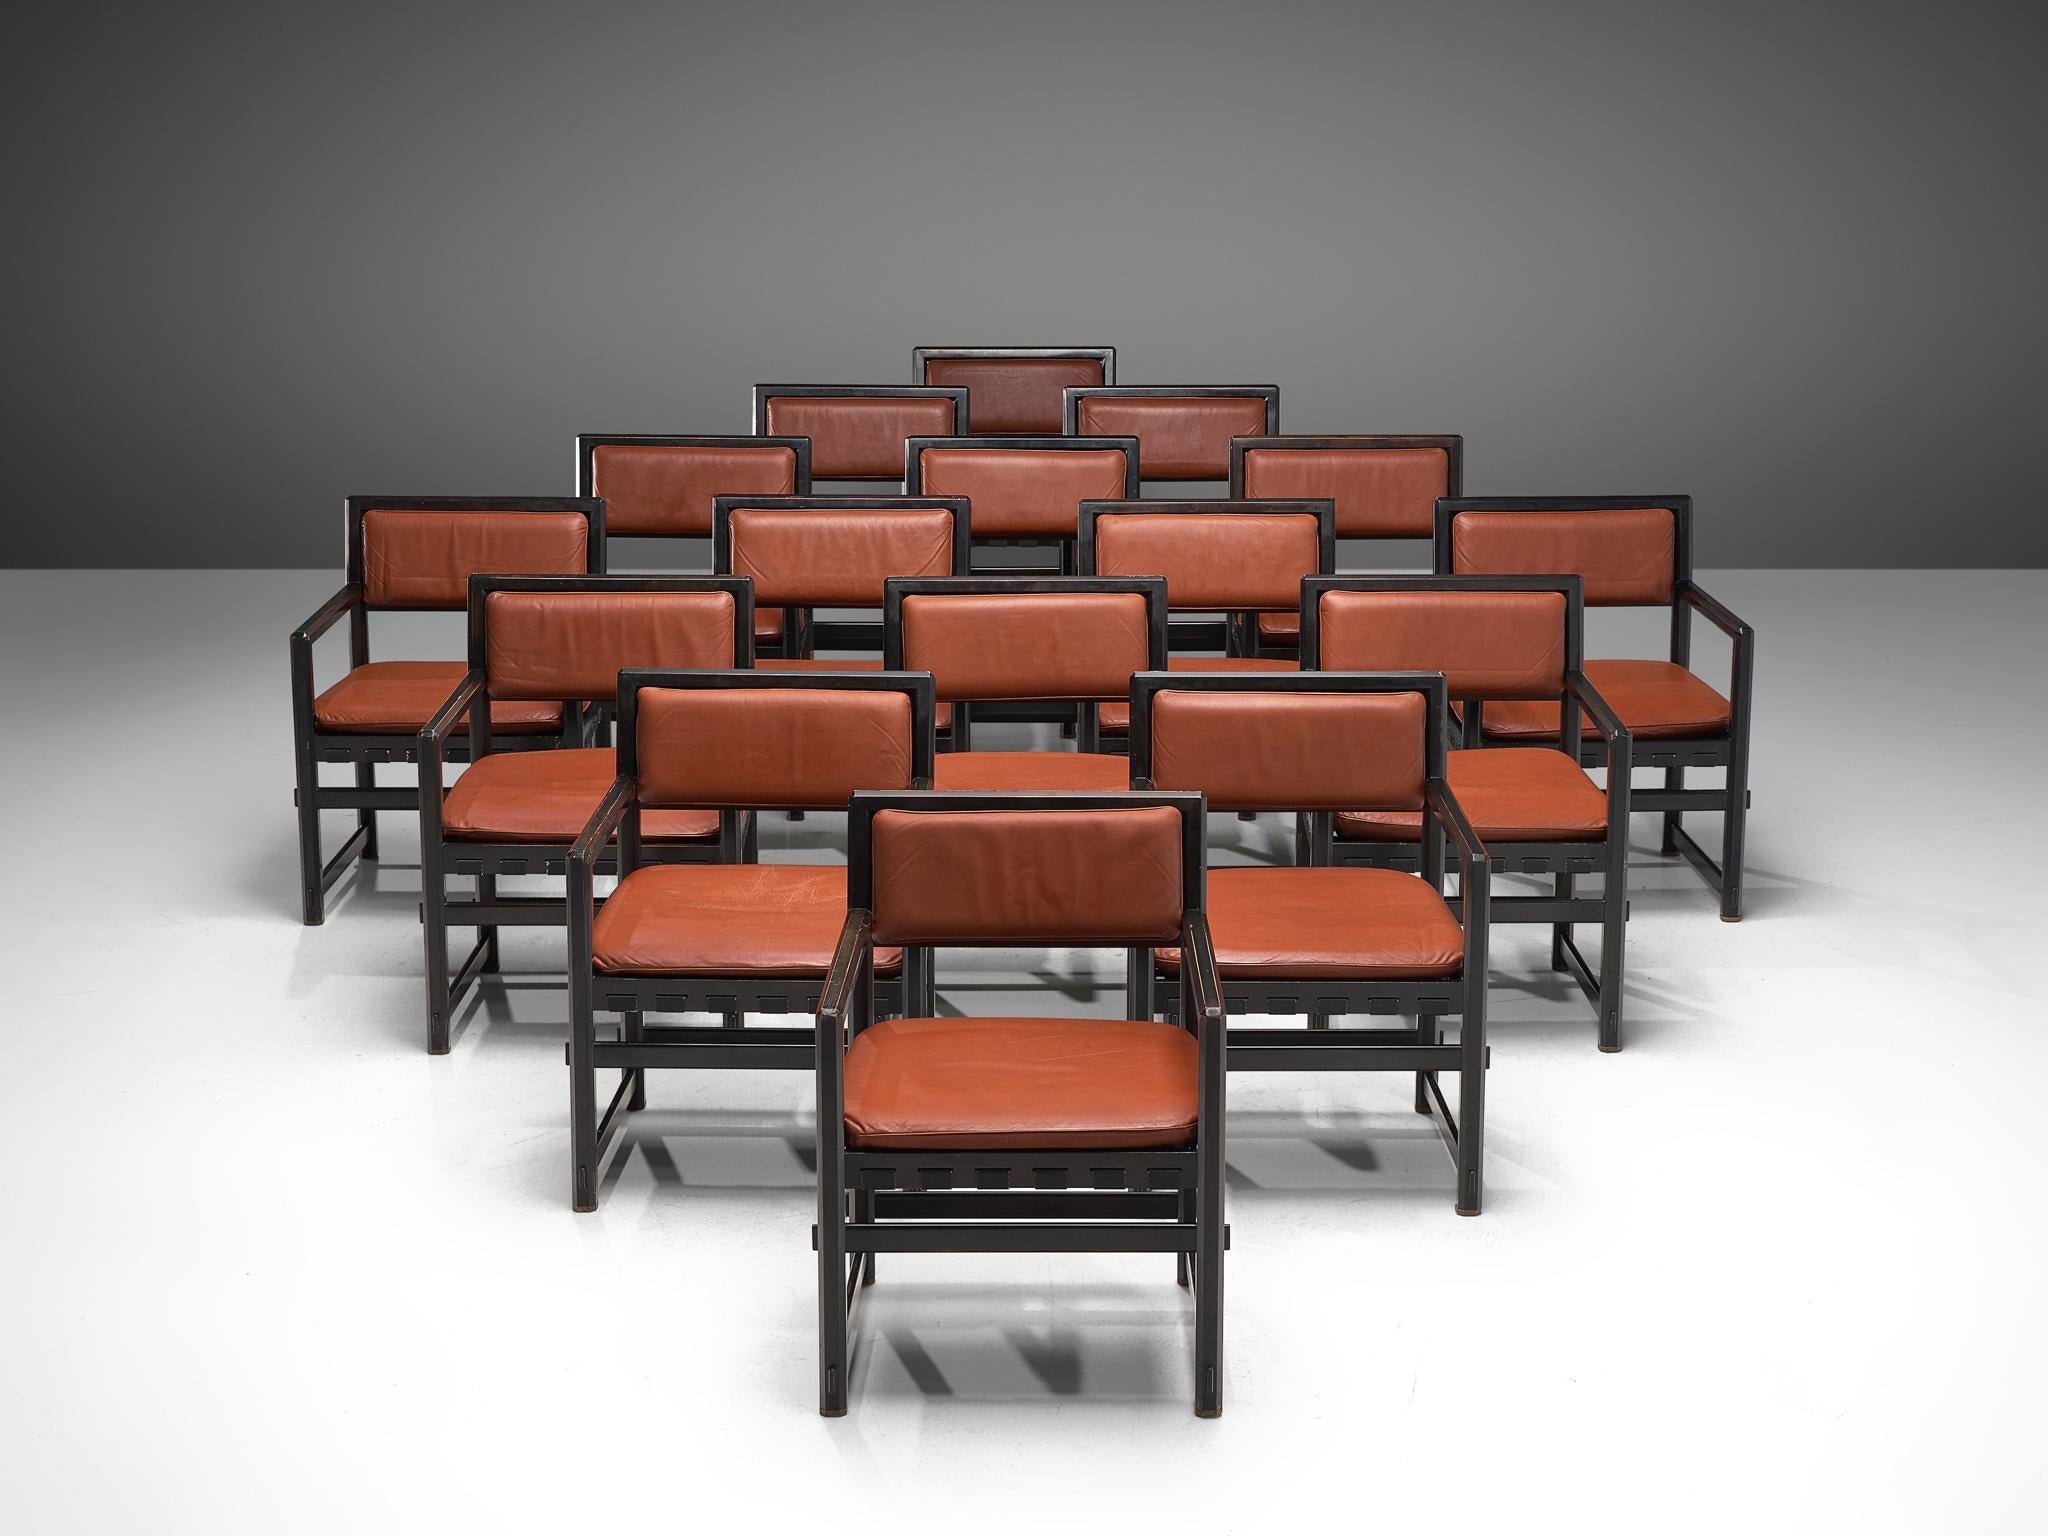 Edward Wormley for Dunbar by Mobilier Universel, armchairs model '5762', lacquered black wood, red leather, Belgium, design 1957. 

This set of sixteen grand armchairs by Edward Wormley is designed in 1957. The chairs consist of a black lacquered